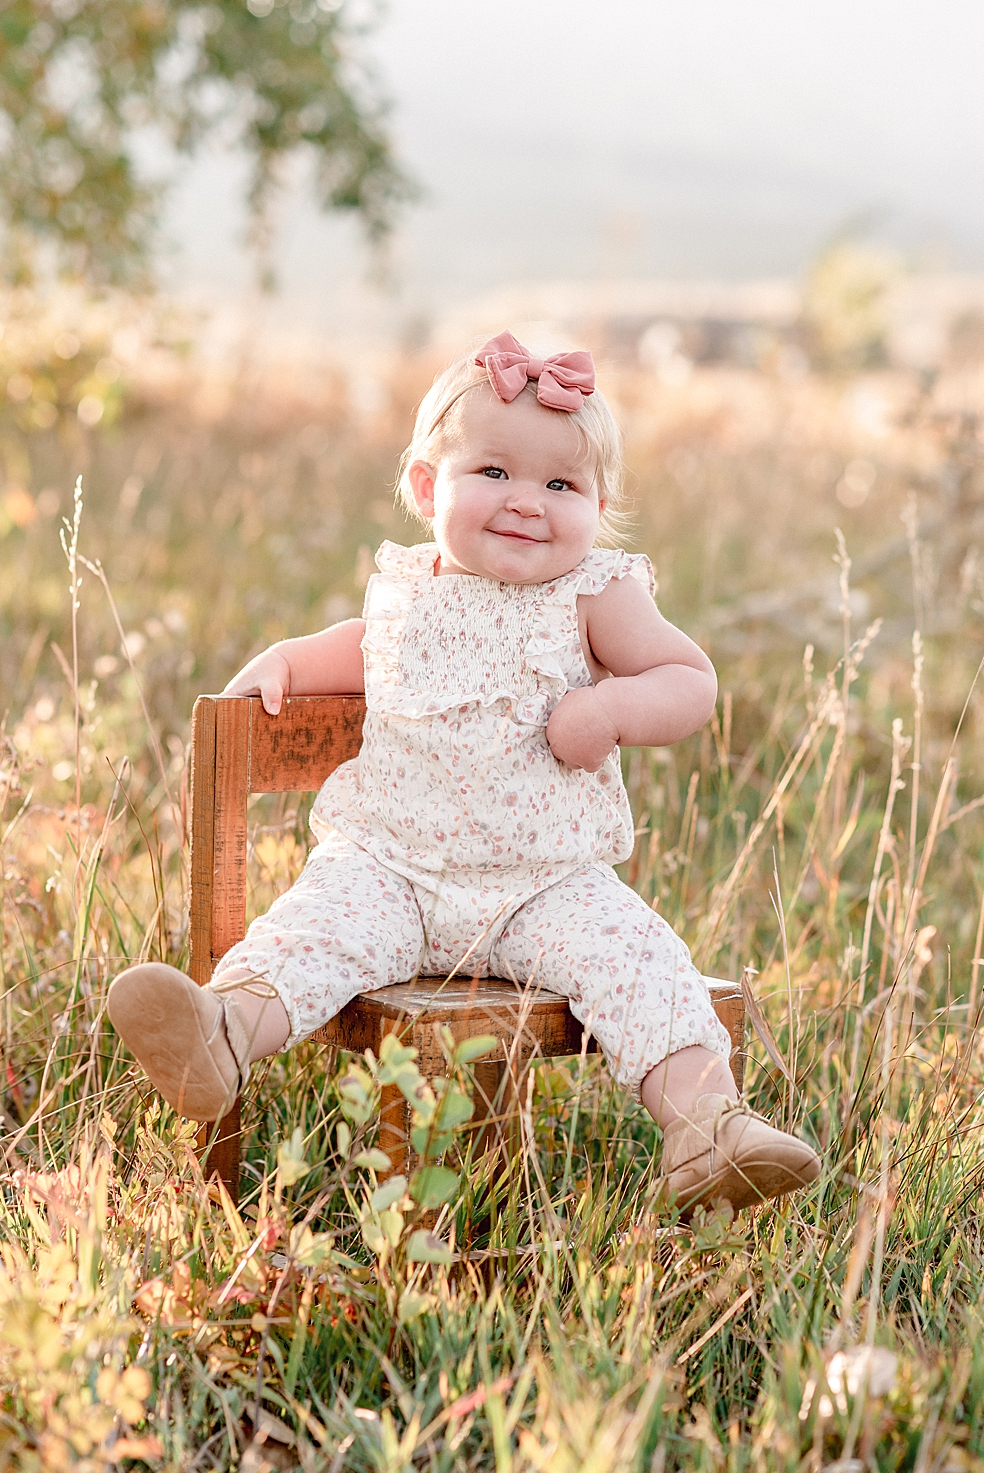 Toddler baby girl sitting on a brown chair in the grass | Photo by Jessica Lee Photography